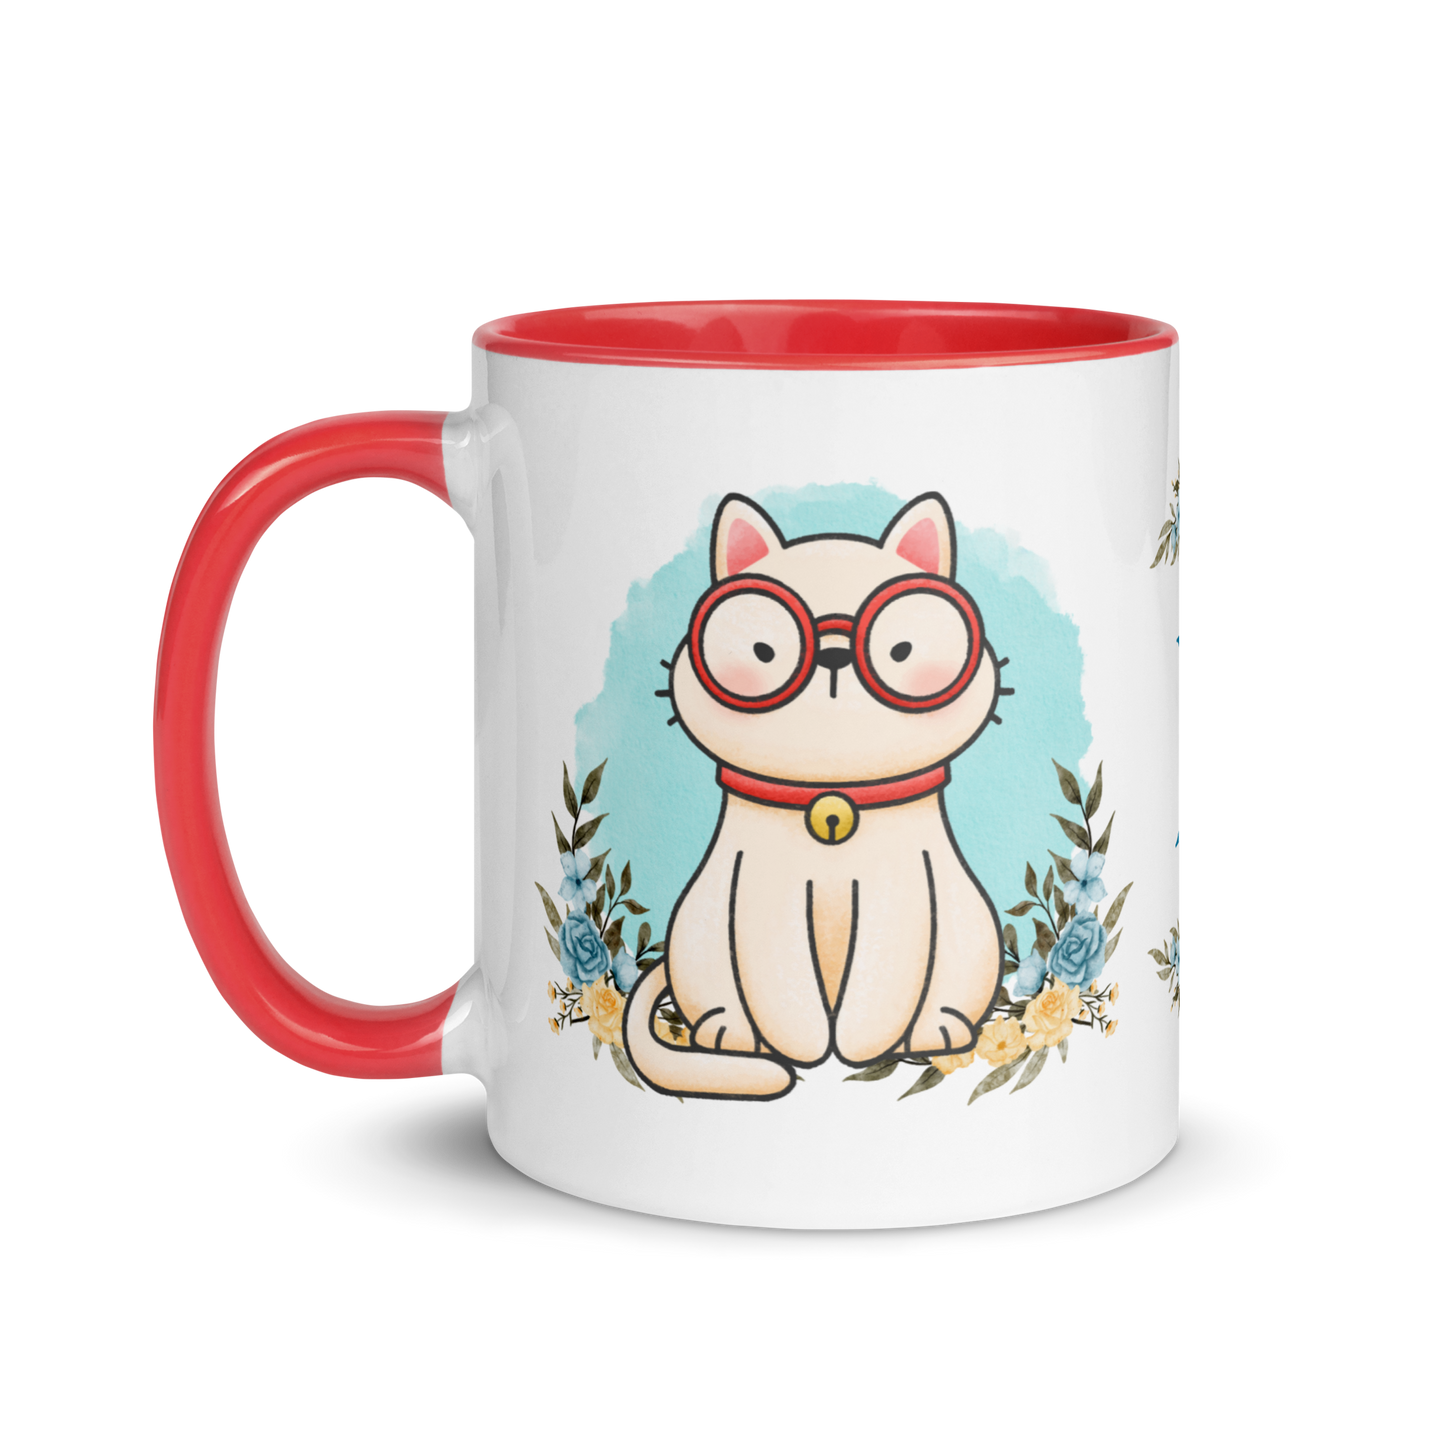 Personalized Monogram Mug 11oz | Cute Cat Wearing Glasses Floral Themed